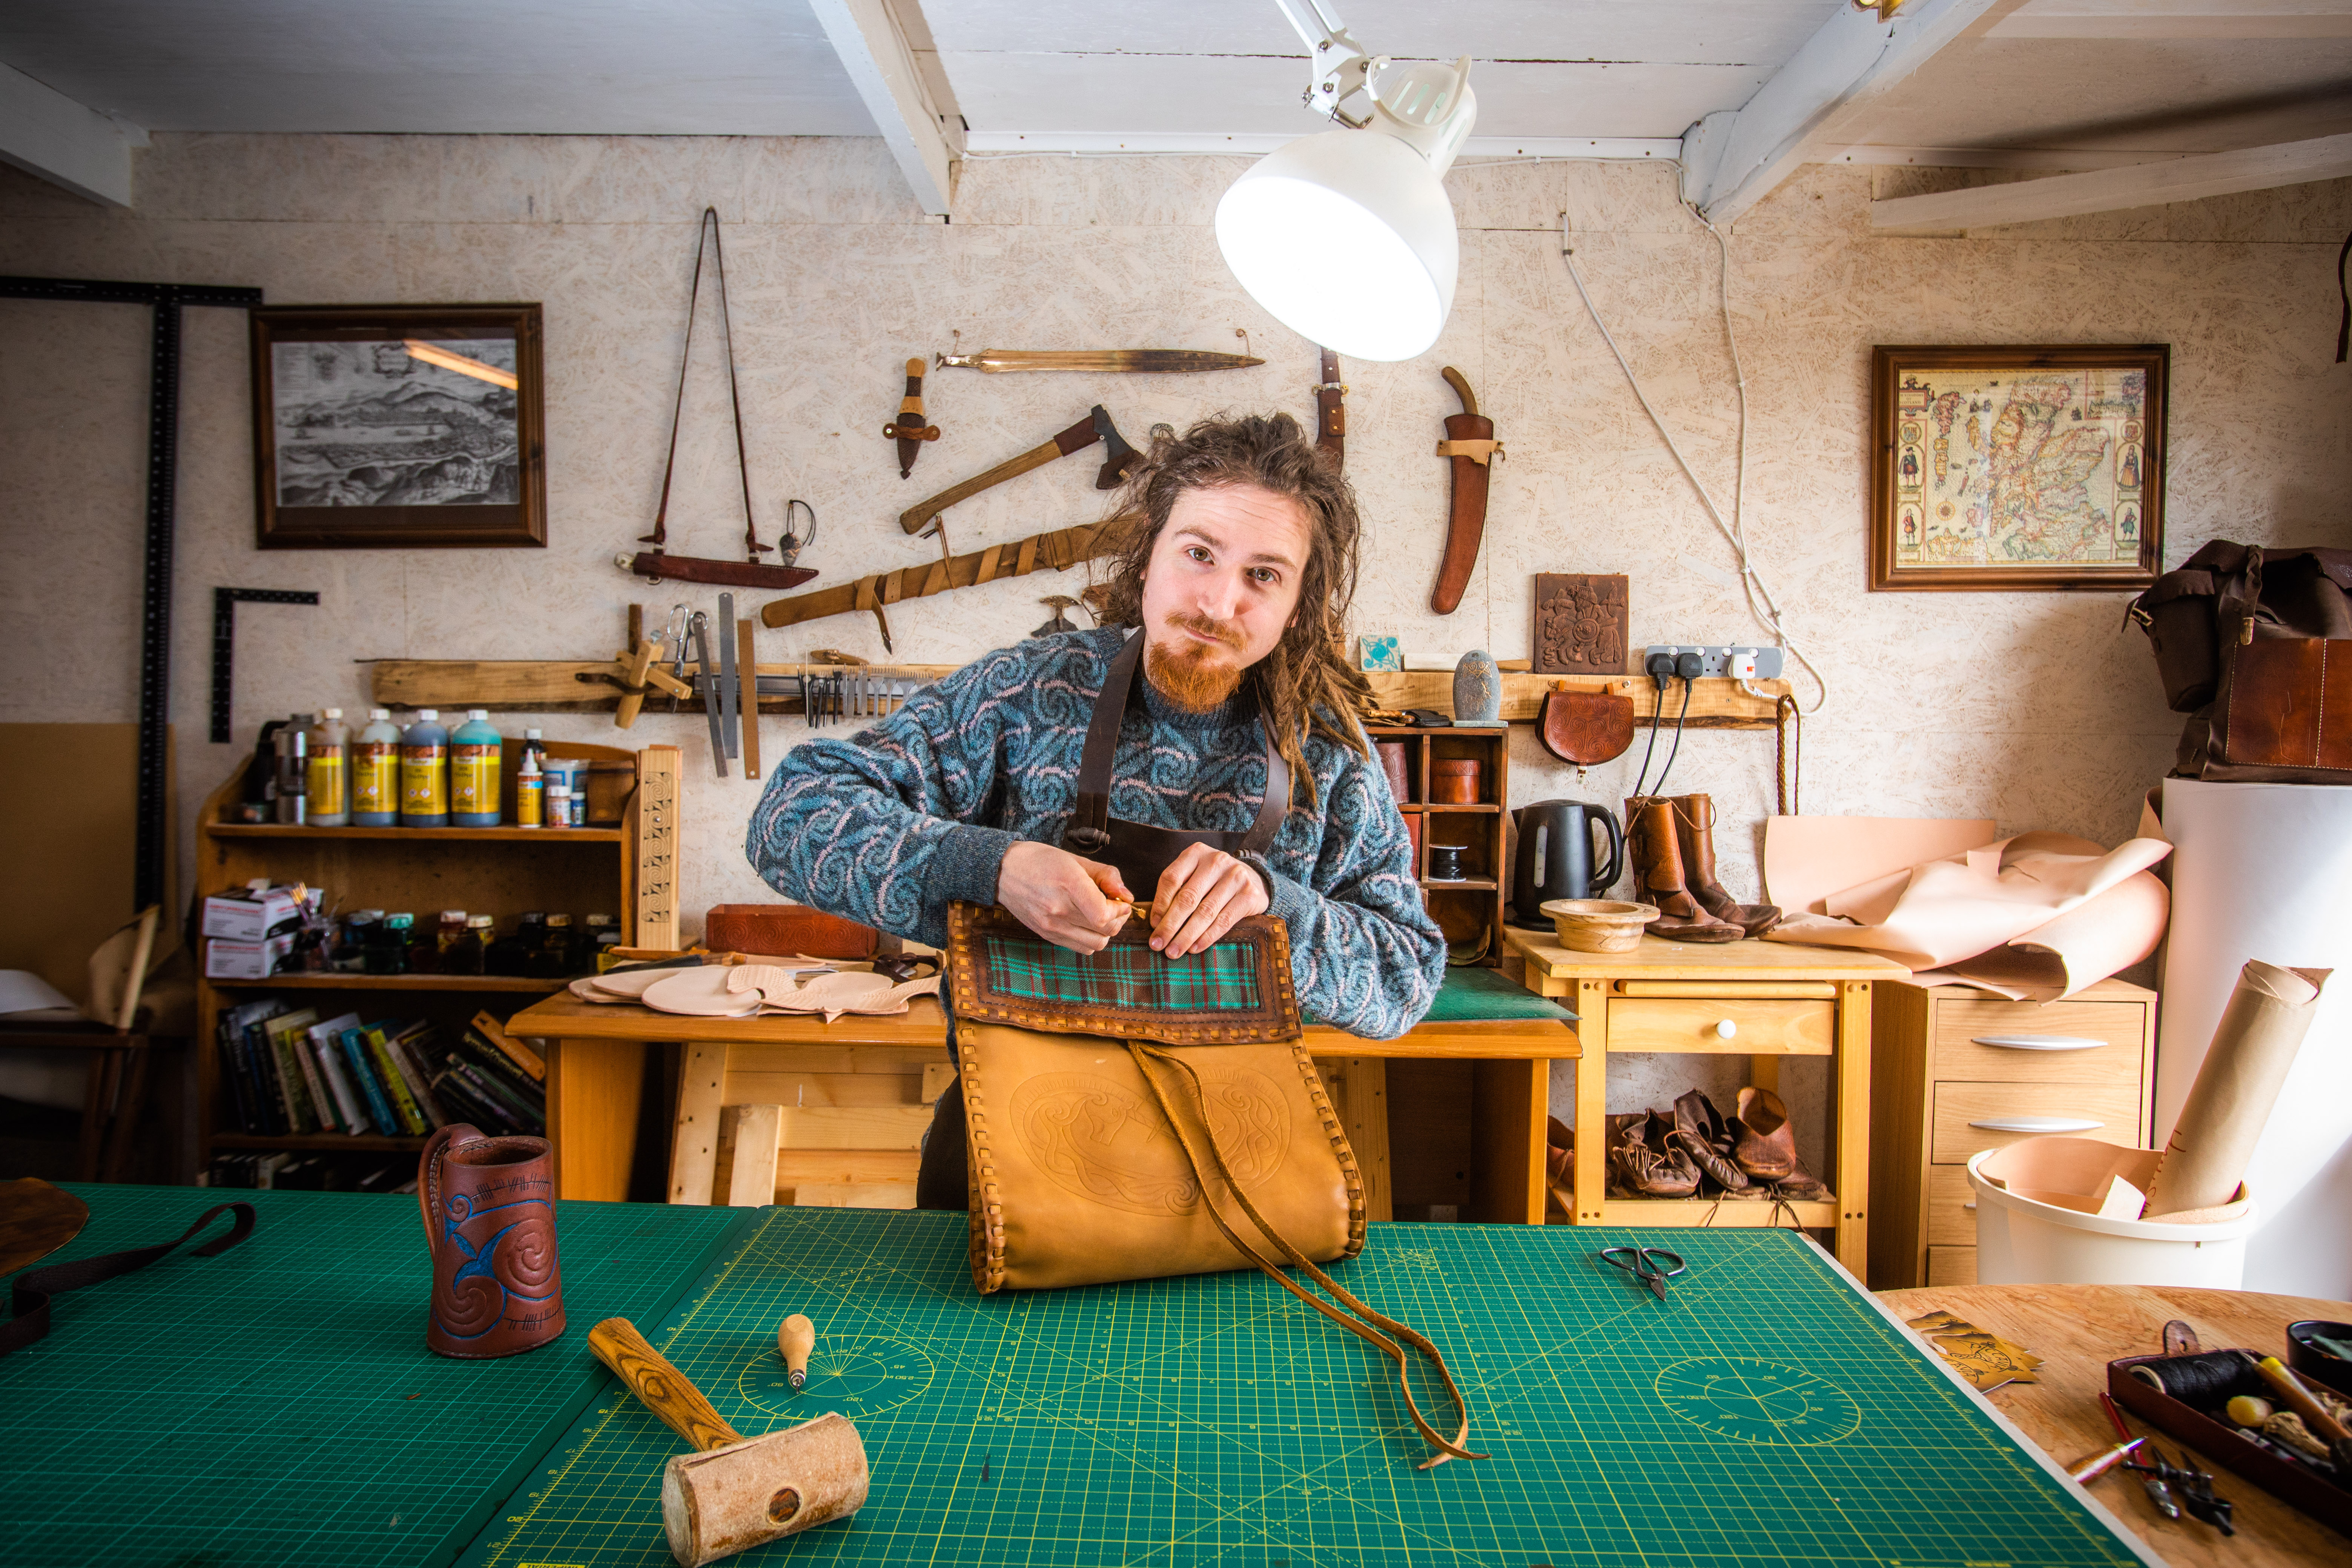 Hamish Lamley in his workshop working on a bag.